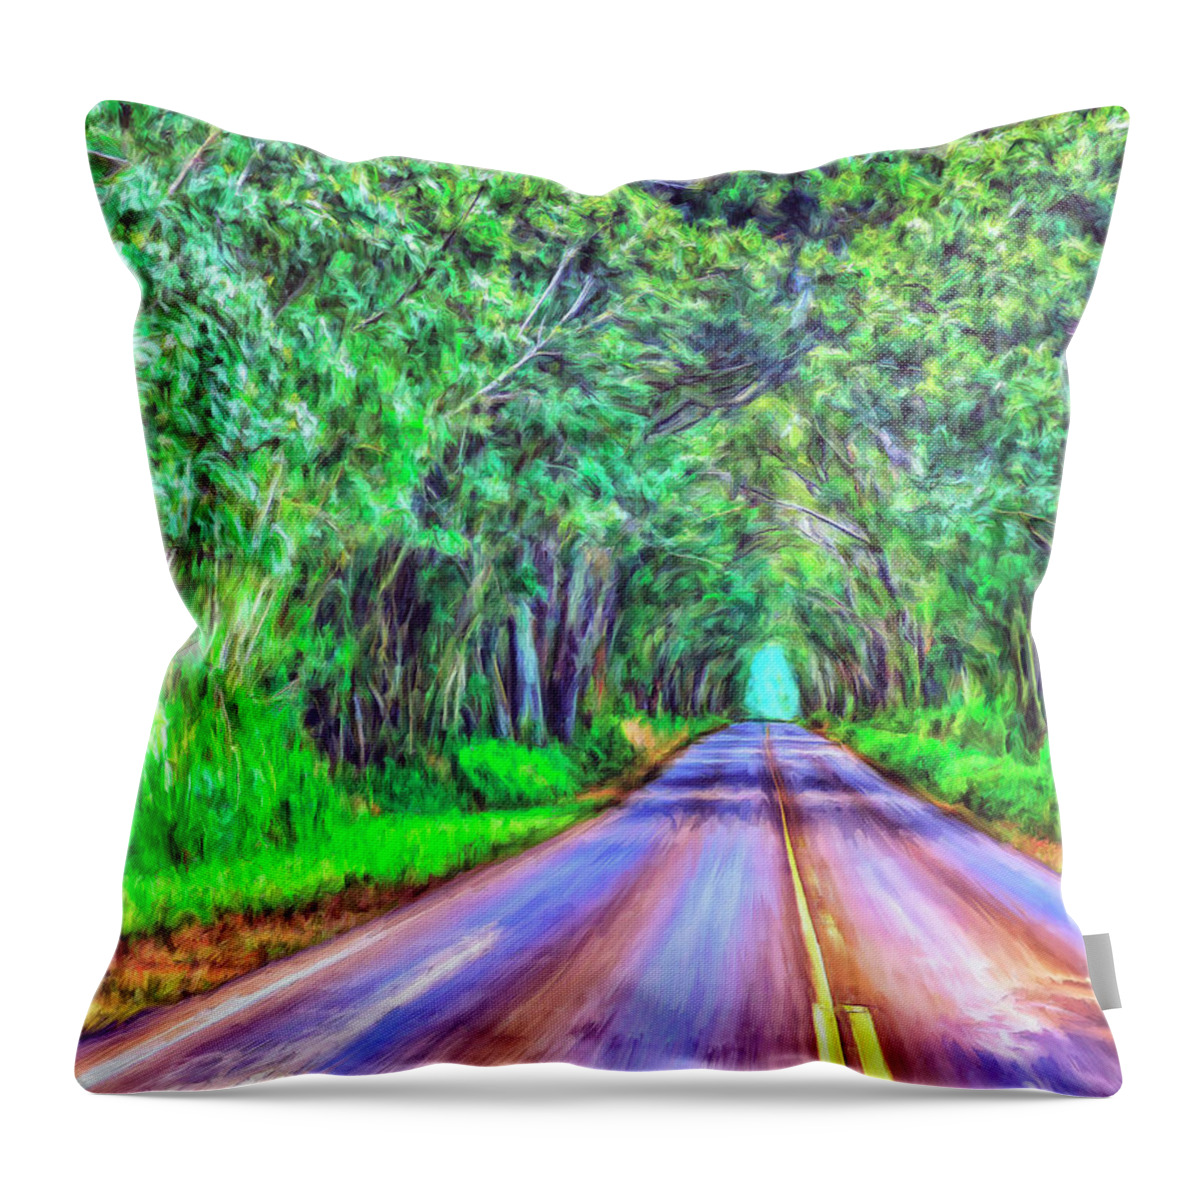 Tree Tunnel Throw Pillow featuring the painting Tree Tunnel Kauai by Dominic Piperata